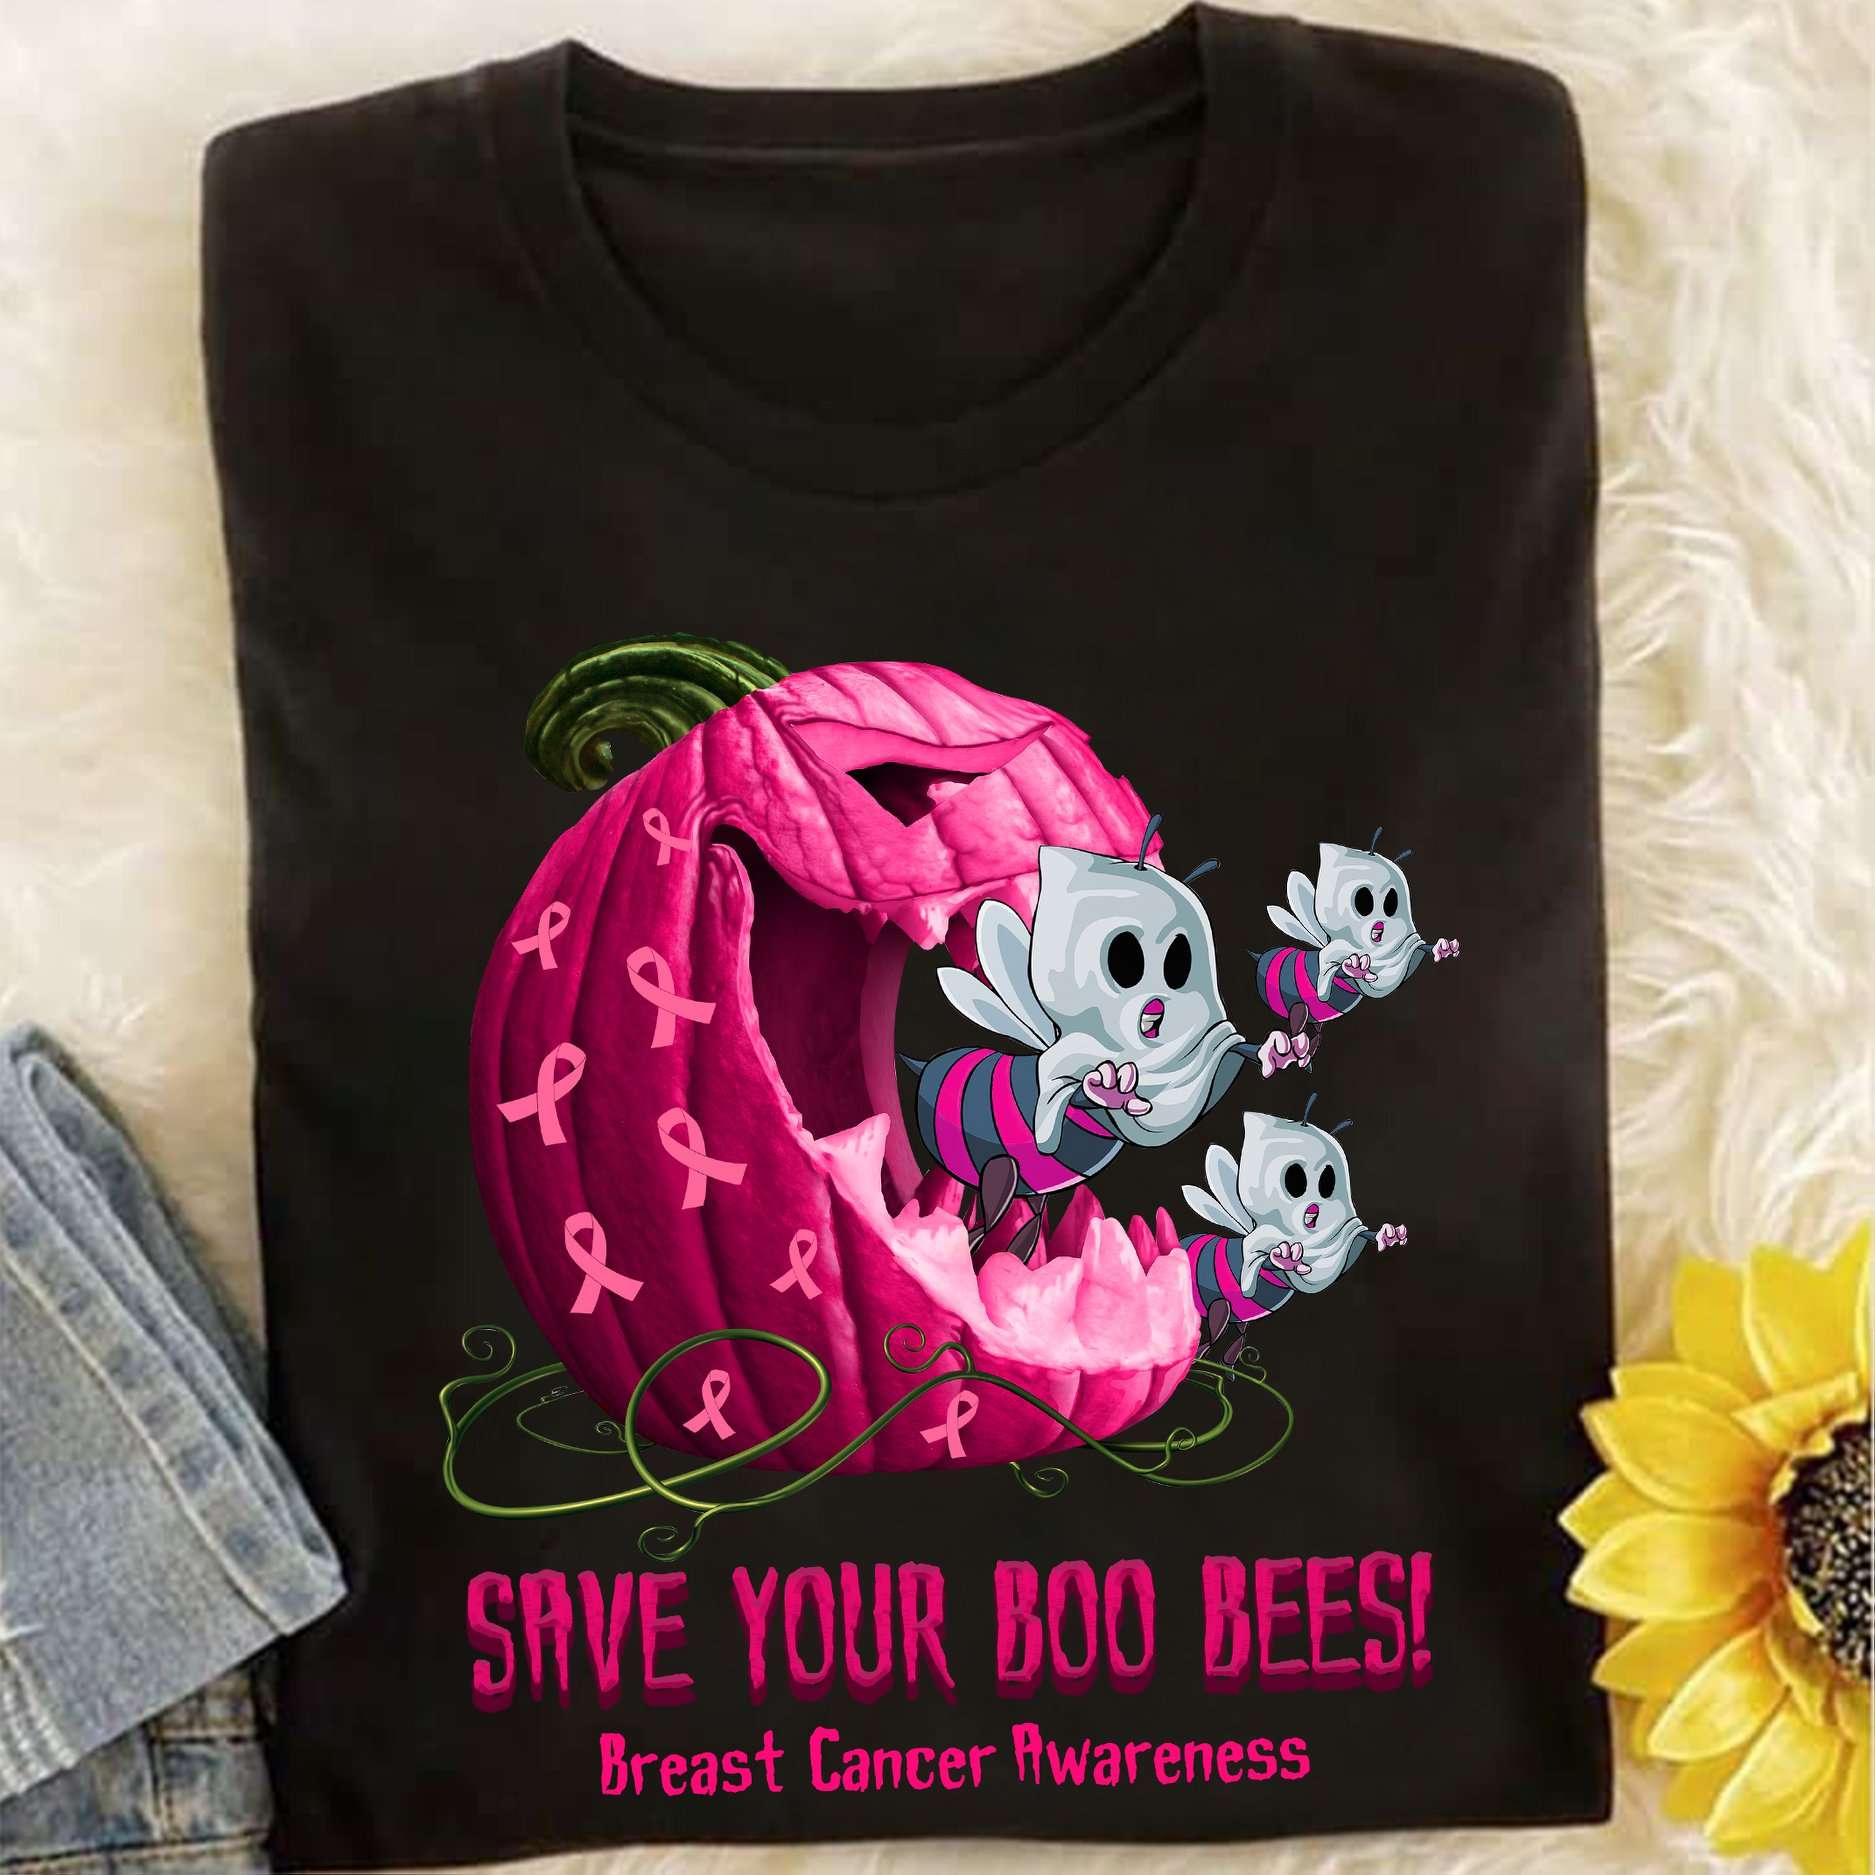 Save your boo bees - Breast cancer awareness, Pink devil pumpkin